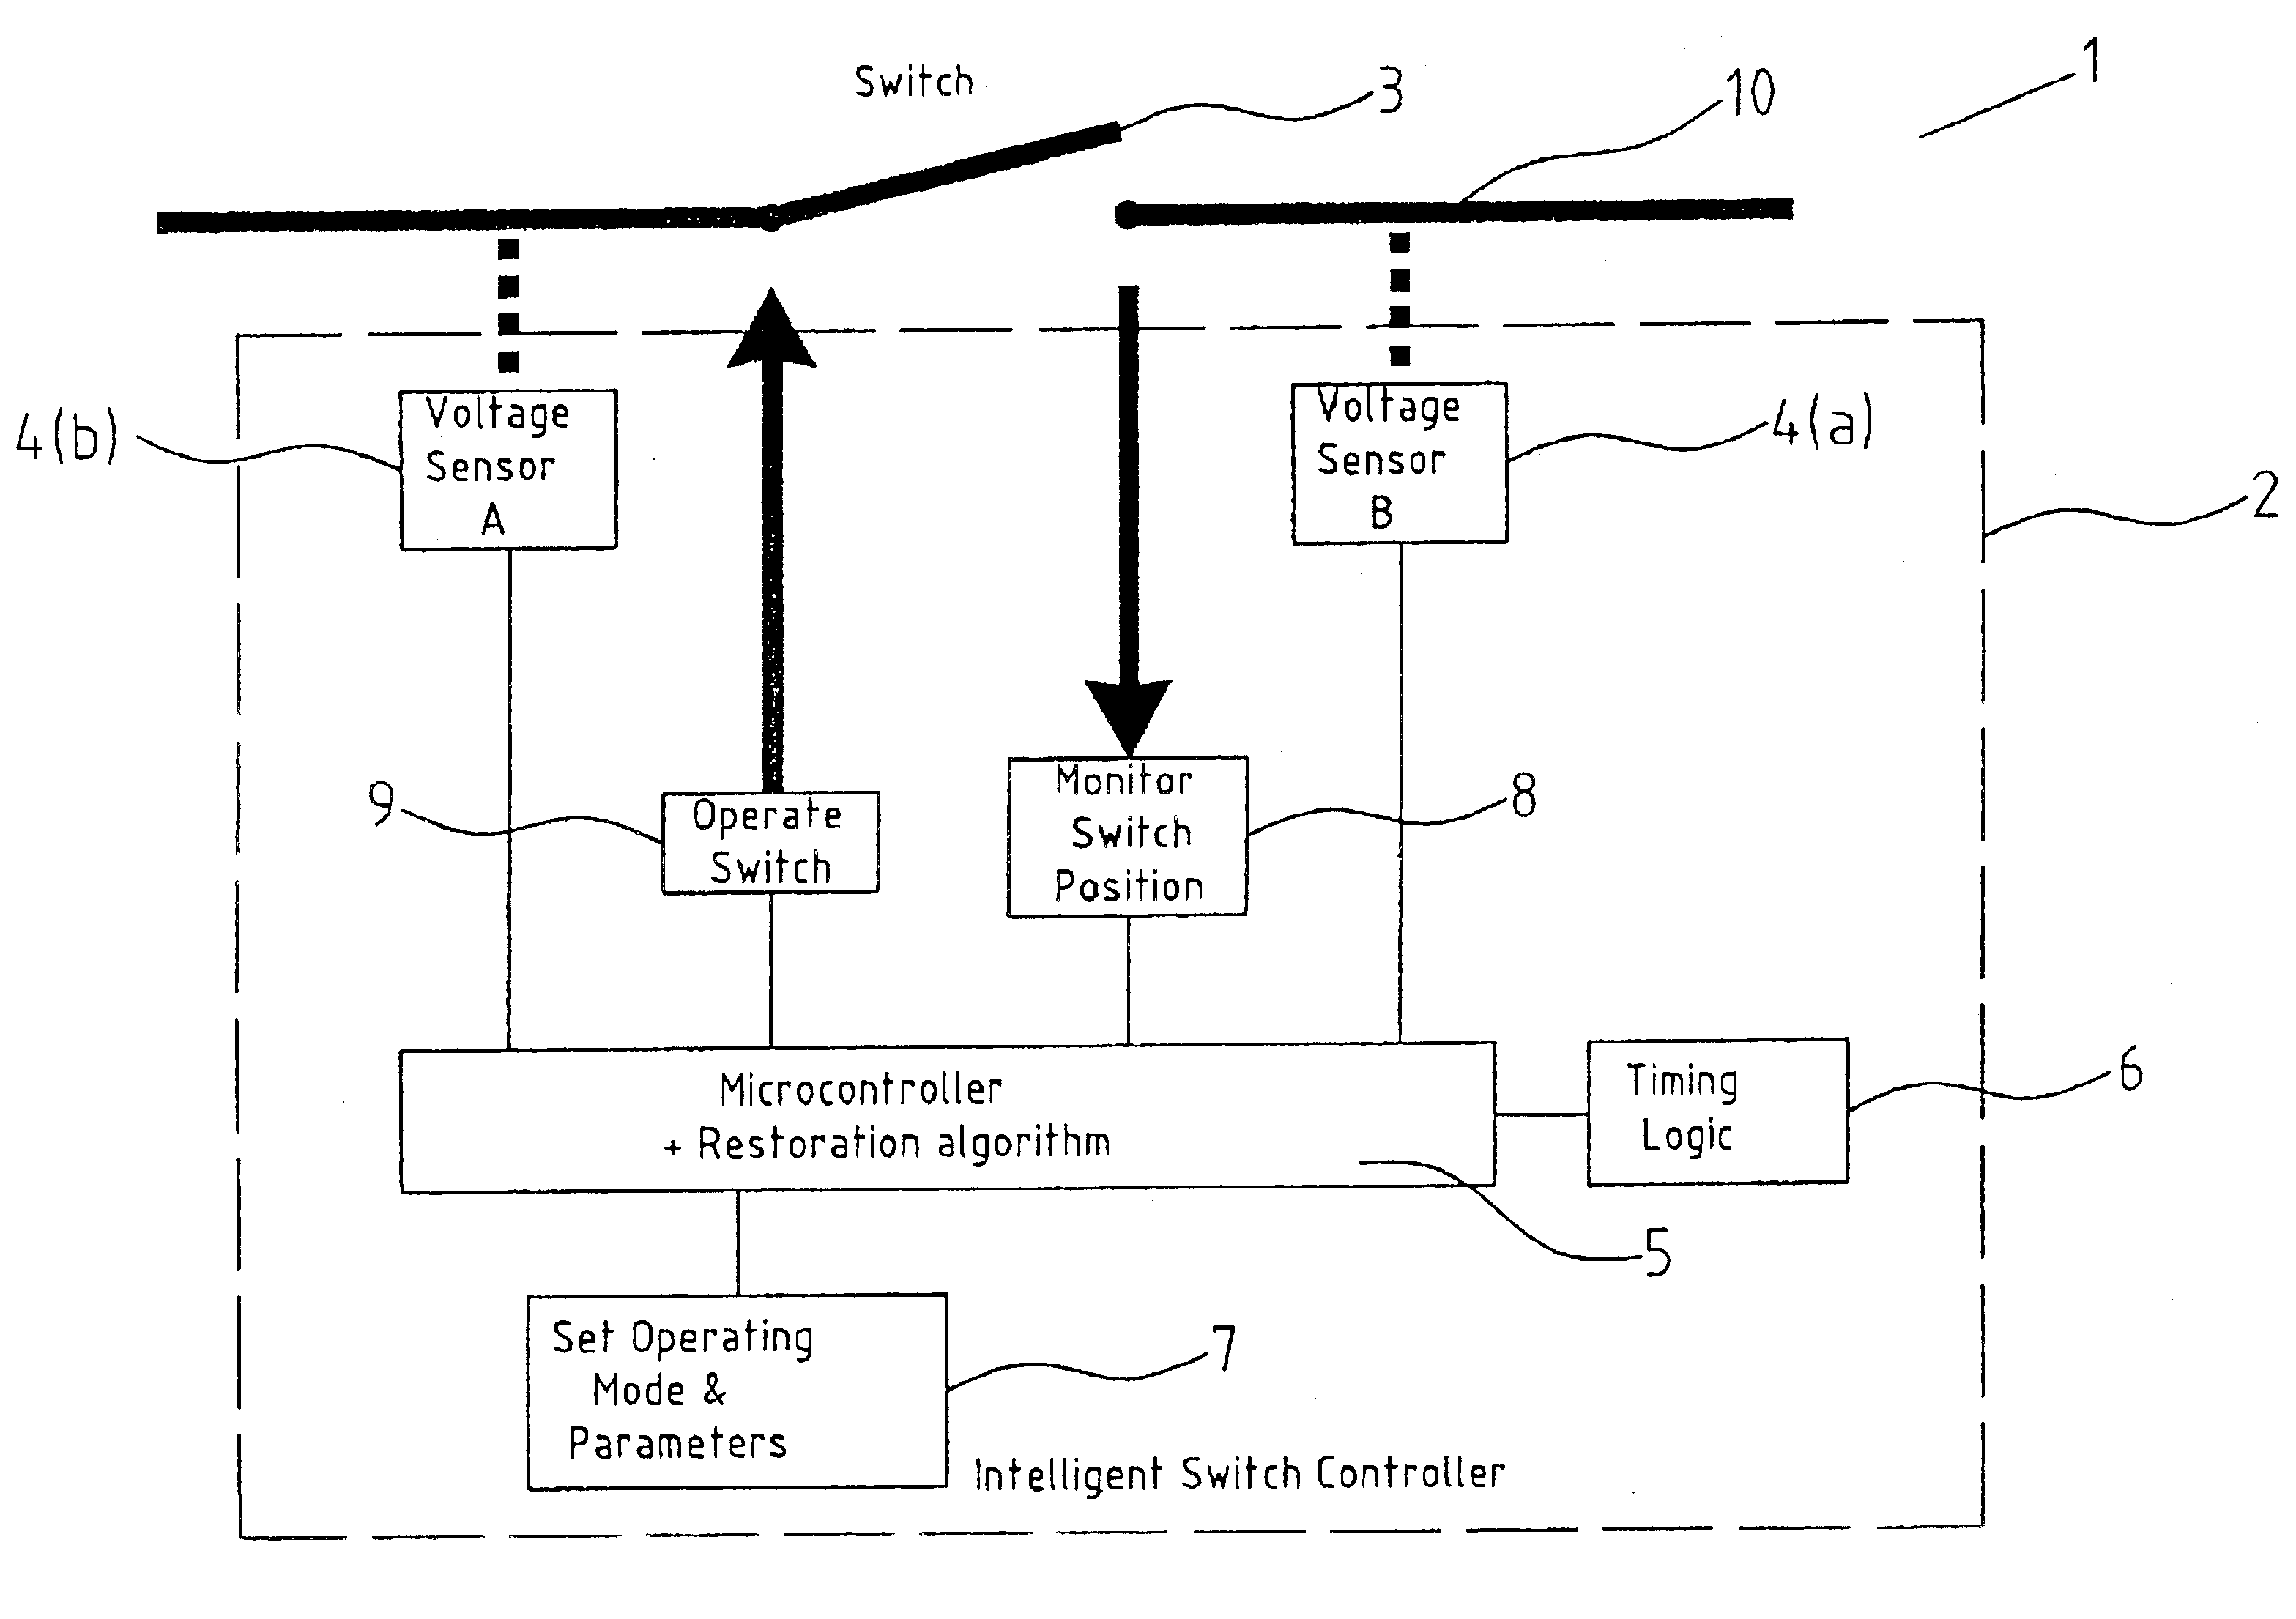 Fault control and restoration in a multi-feed power network